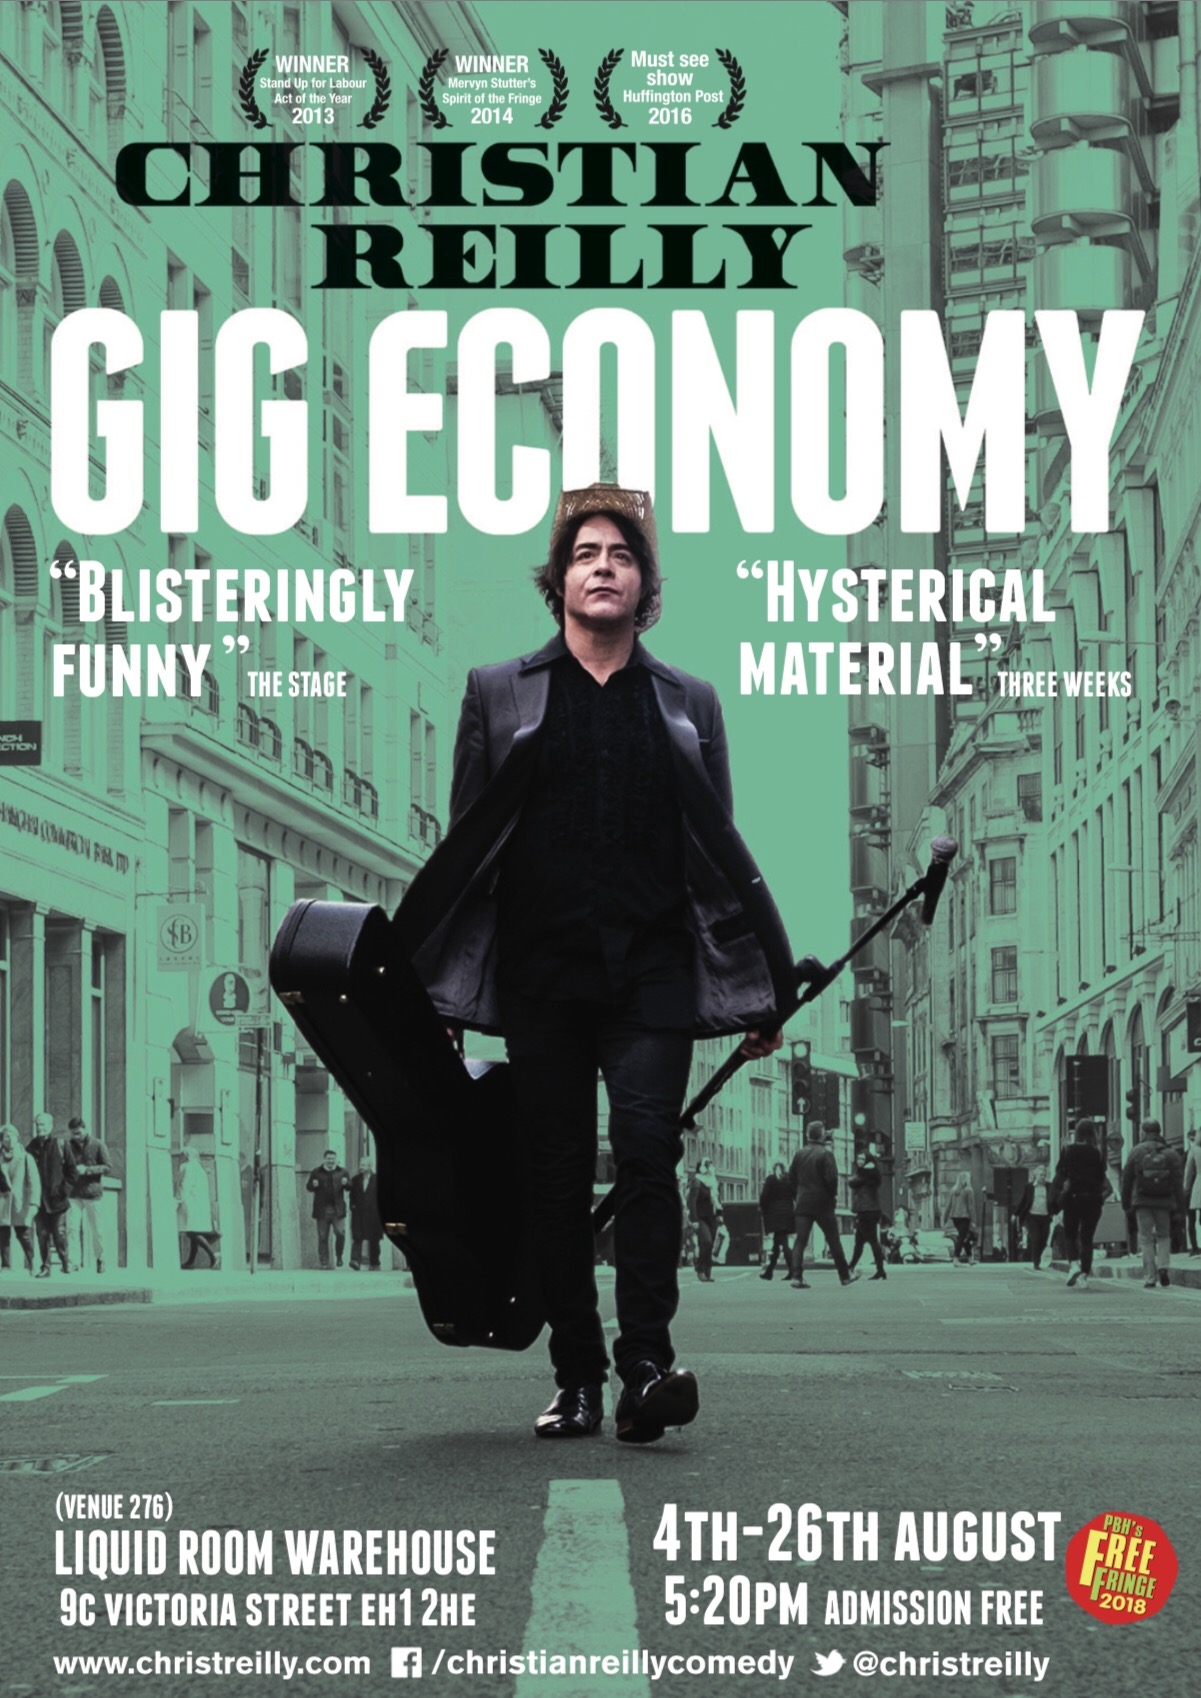 The poster for Christian Reilly: Gig Economy